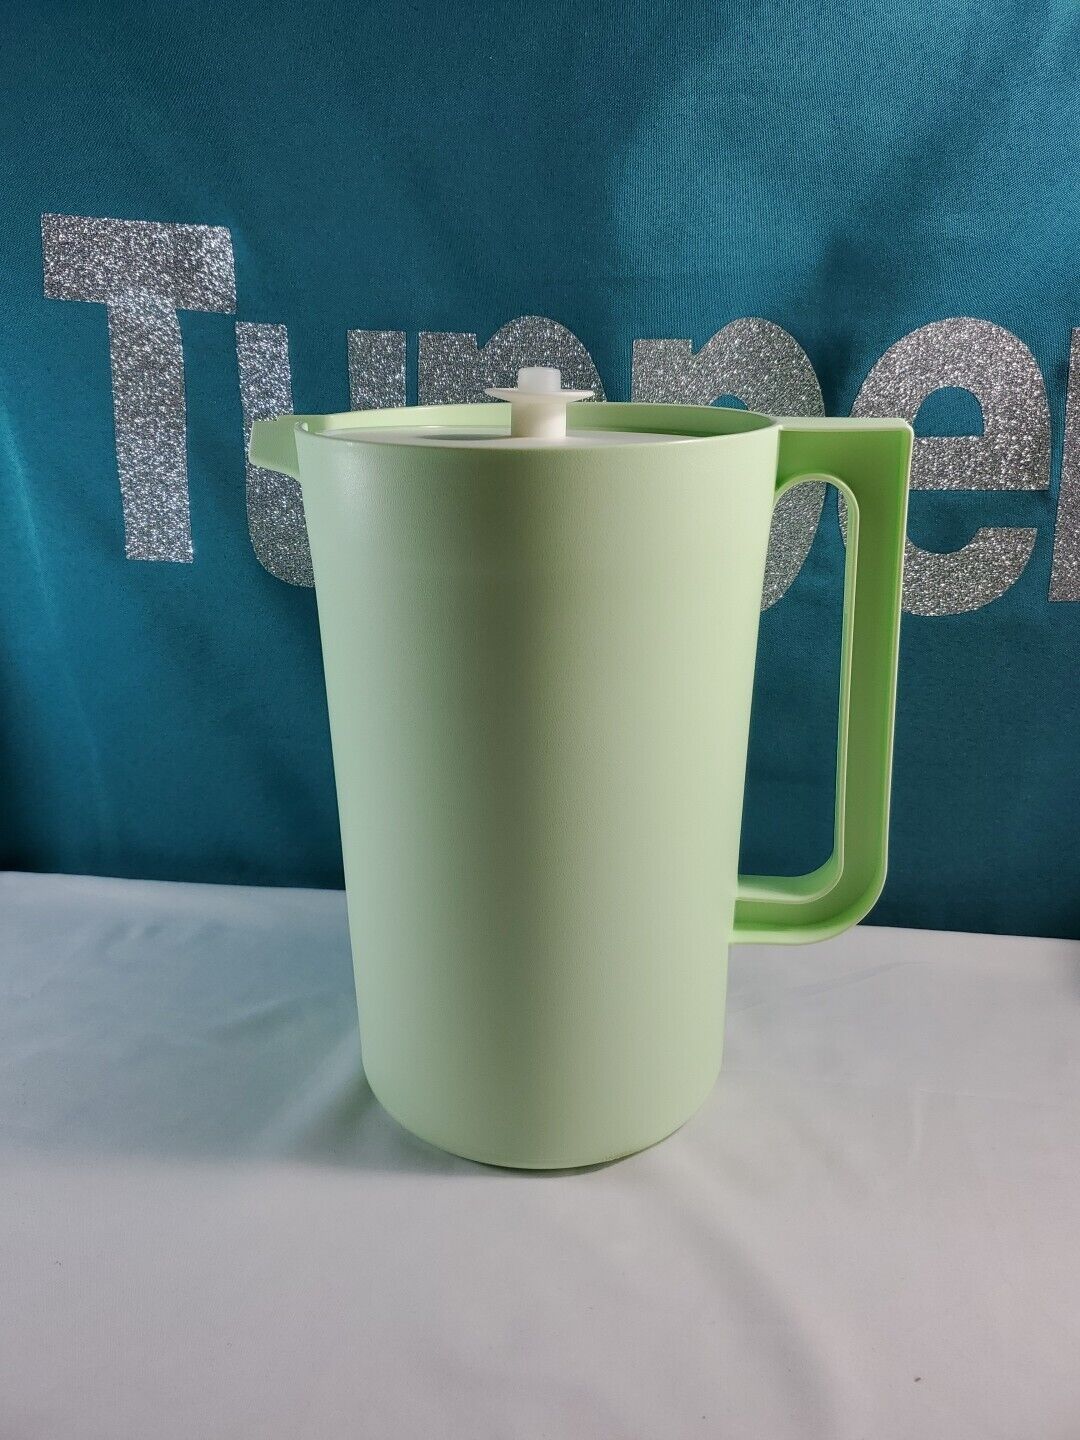 Tupperware Vintage Collection Jumbo Pitcher 1 Gallon Pastel Mint Green 1gal New